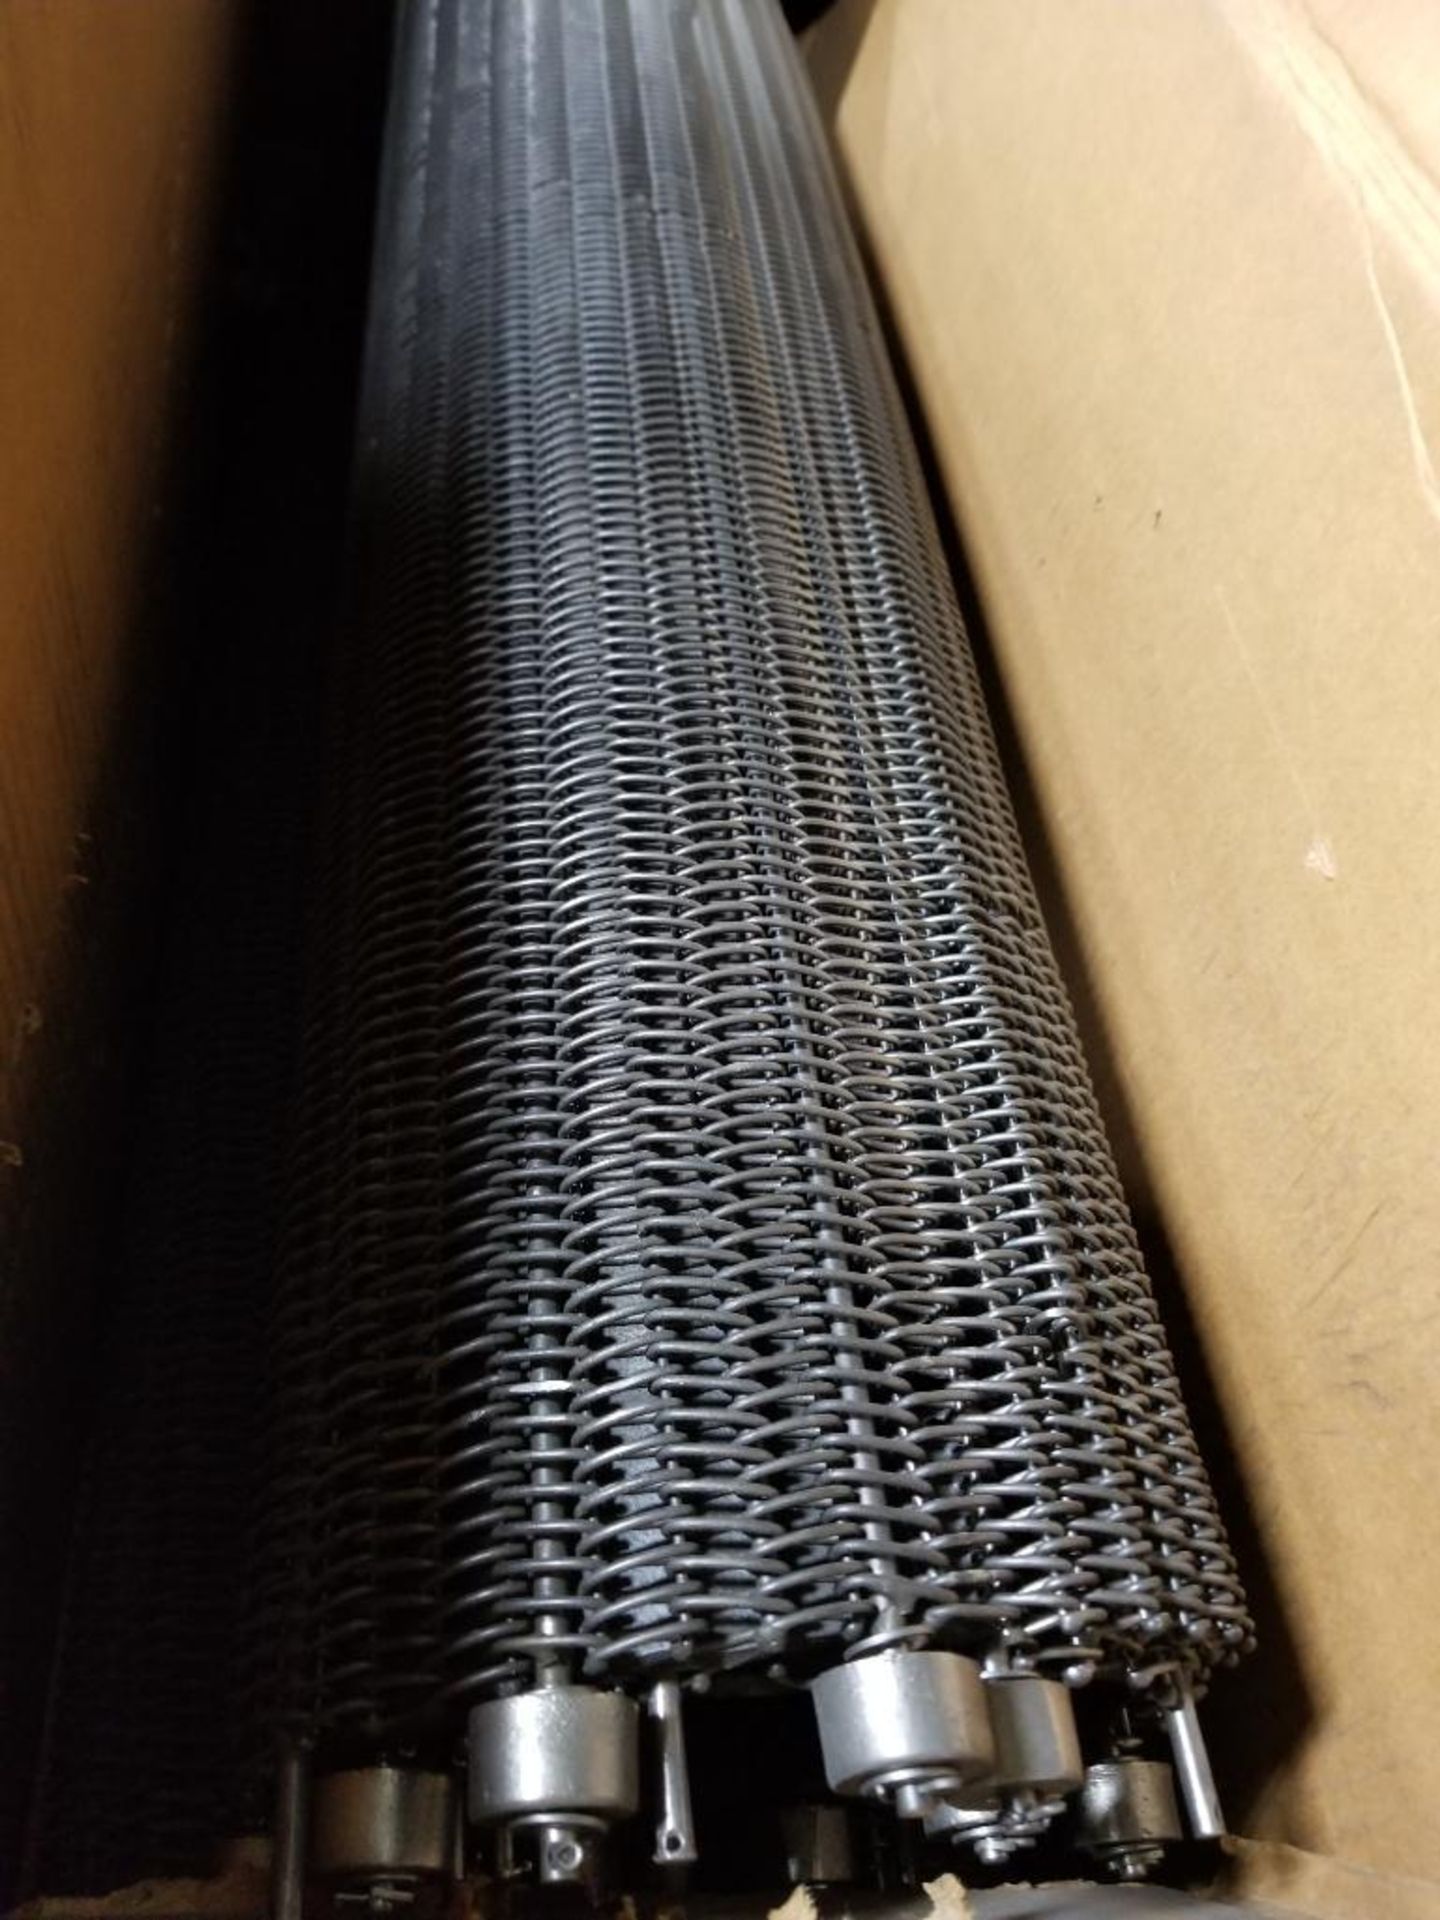 Steel mesh conveyor. New in box. (includes table) - Image 3 of 5